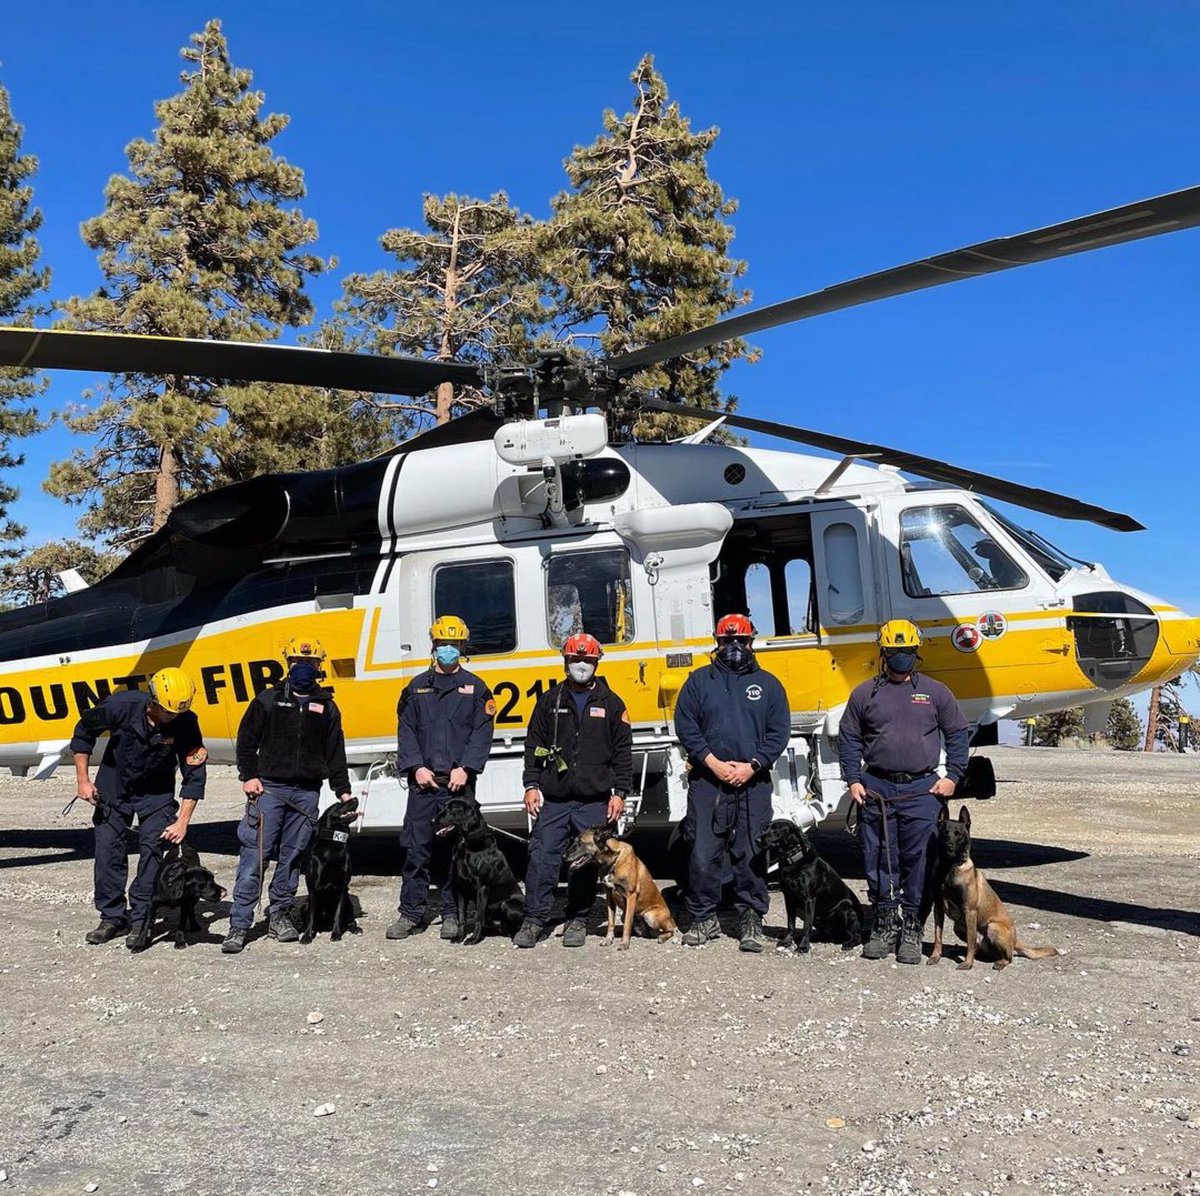 #SearchDogs on duty. #EXFIL #SAR #K9

📷: @lacountysearchdogs